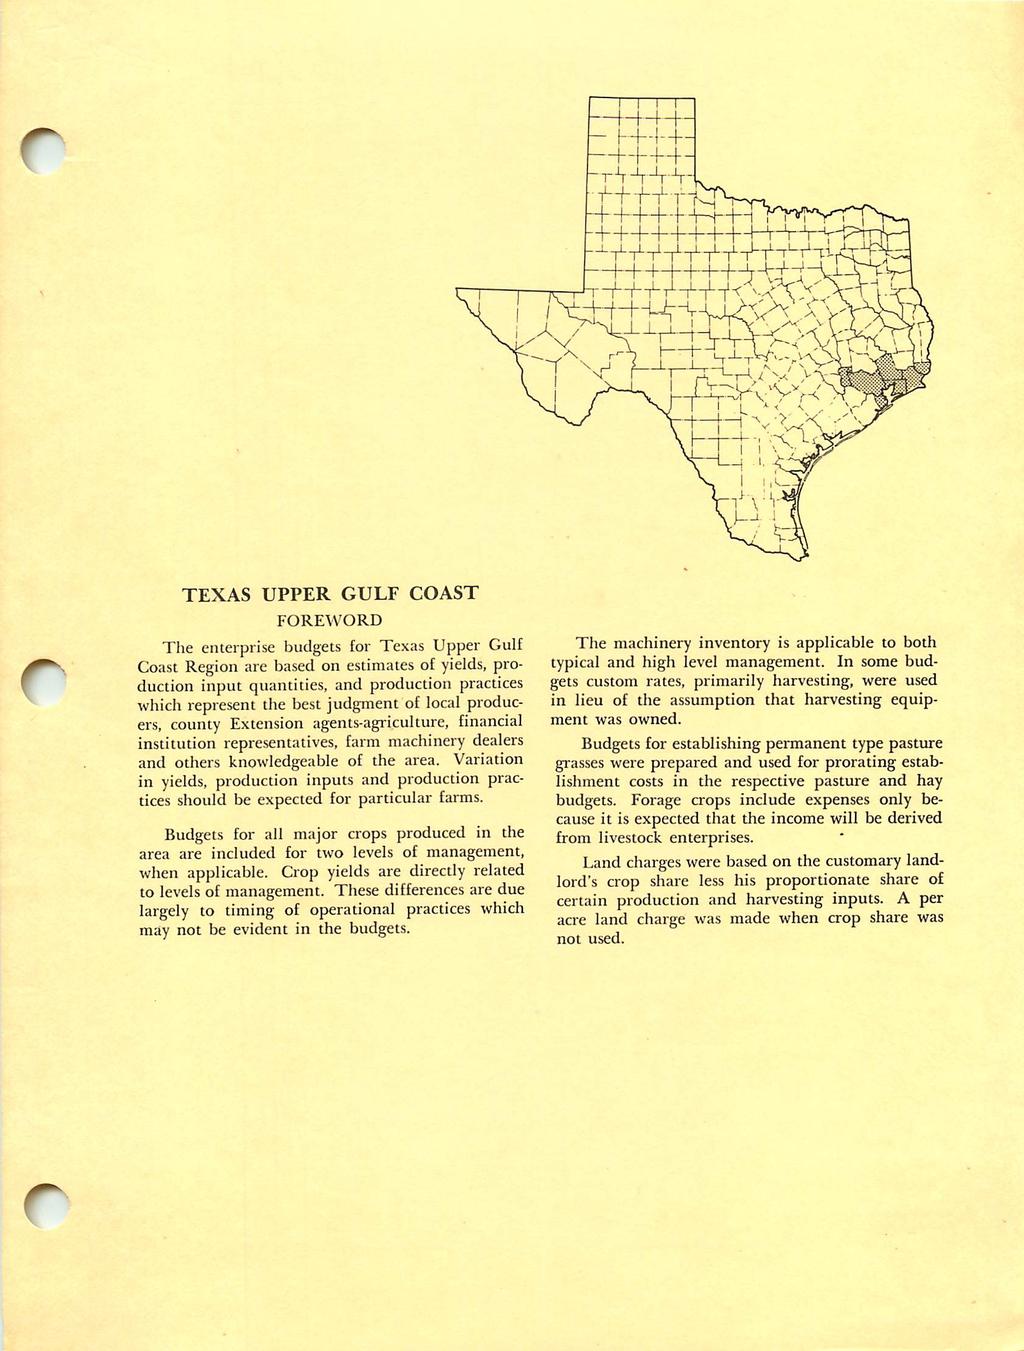 r r TEXAS UPPER GULF COAST FOREWORD The enterprise budgets for Texas Upper Gulf Coast Region are based on estimates of yields, pro duction input quantities, and production practices which represent